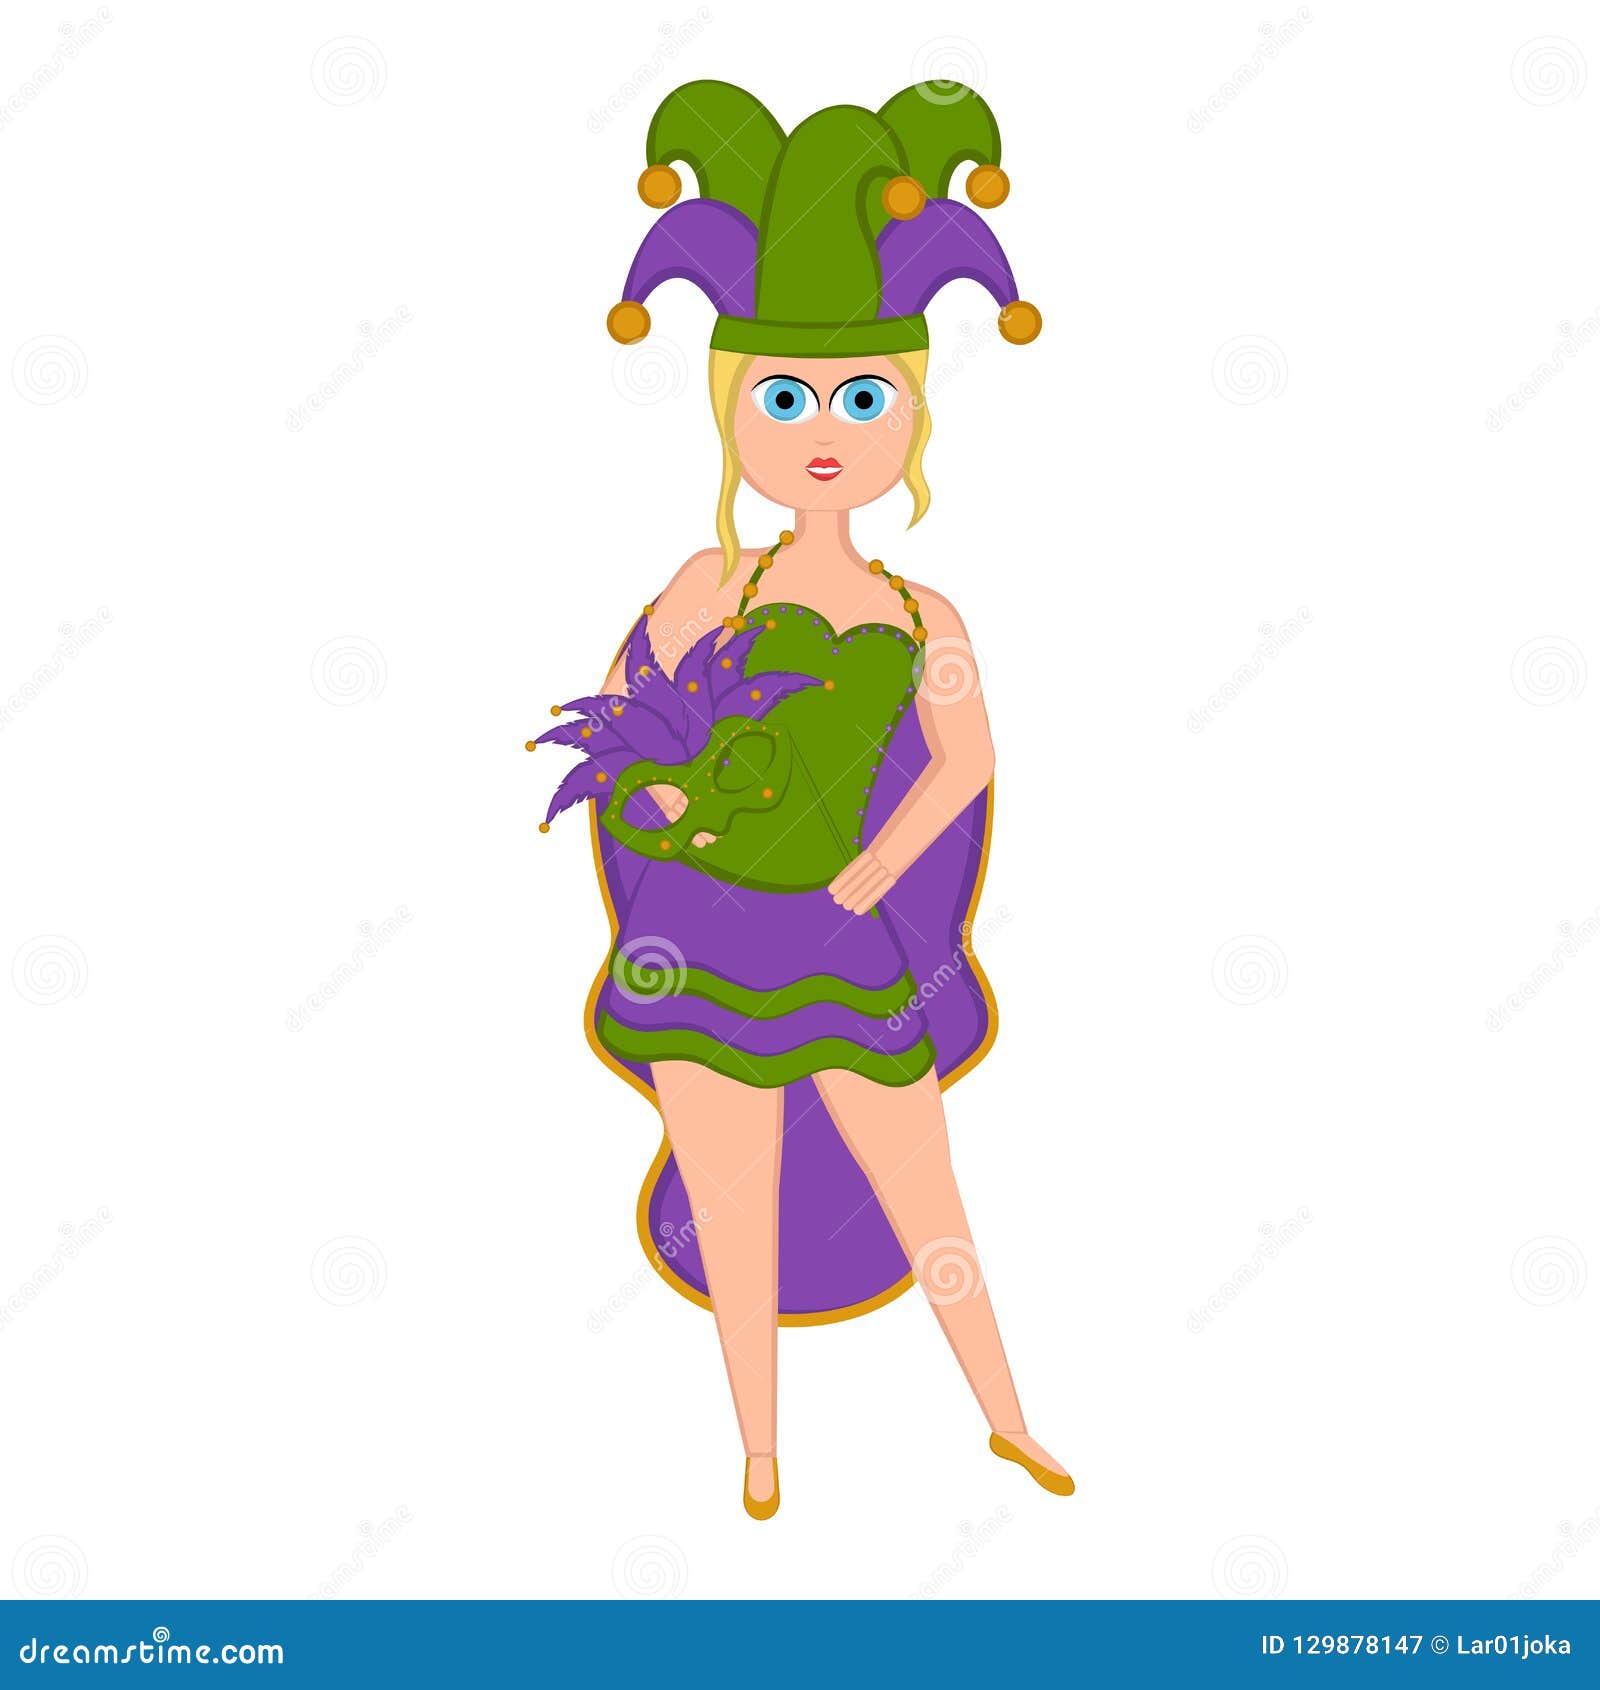 Girl With A Mardi Gras Costume Stock Vector Illustration Of Yellow Decoration 129878147 